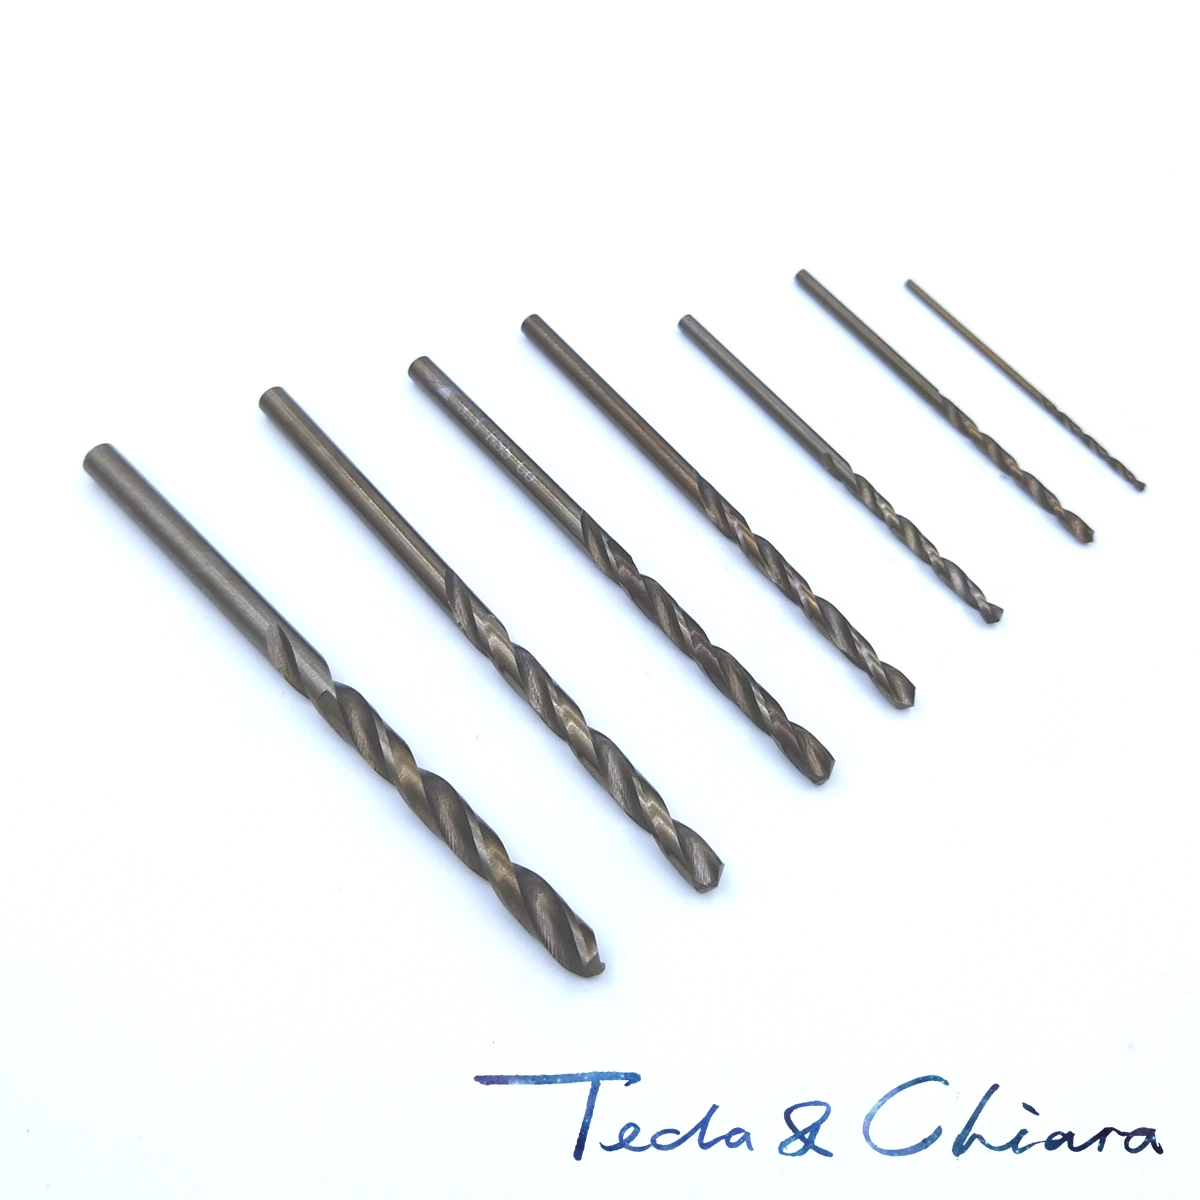 6 6.0 6.1 6.2 6.3 6.4 6.5 6.6 6.7 6.8 6.9 mm HSS-CO M35 Cobalt Steel Straight Shank Twist Drill Bits For Stainless Steel